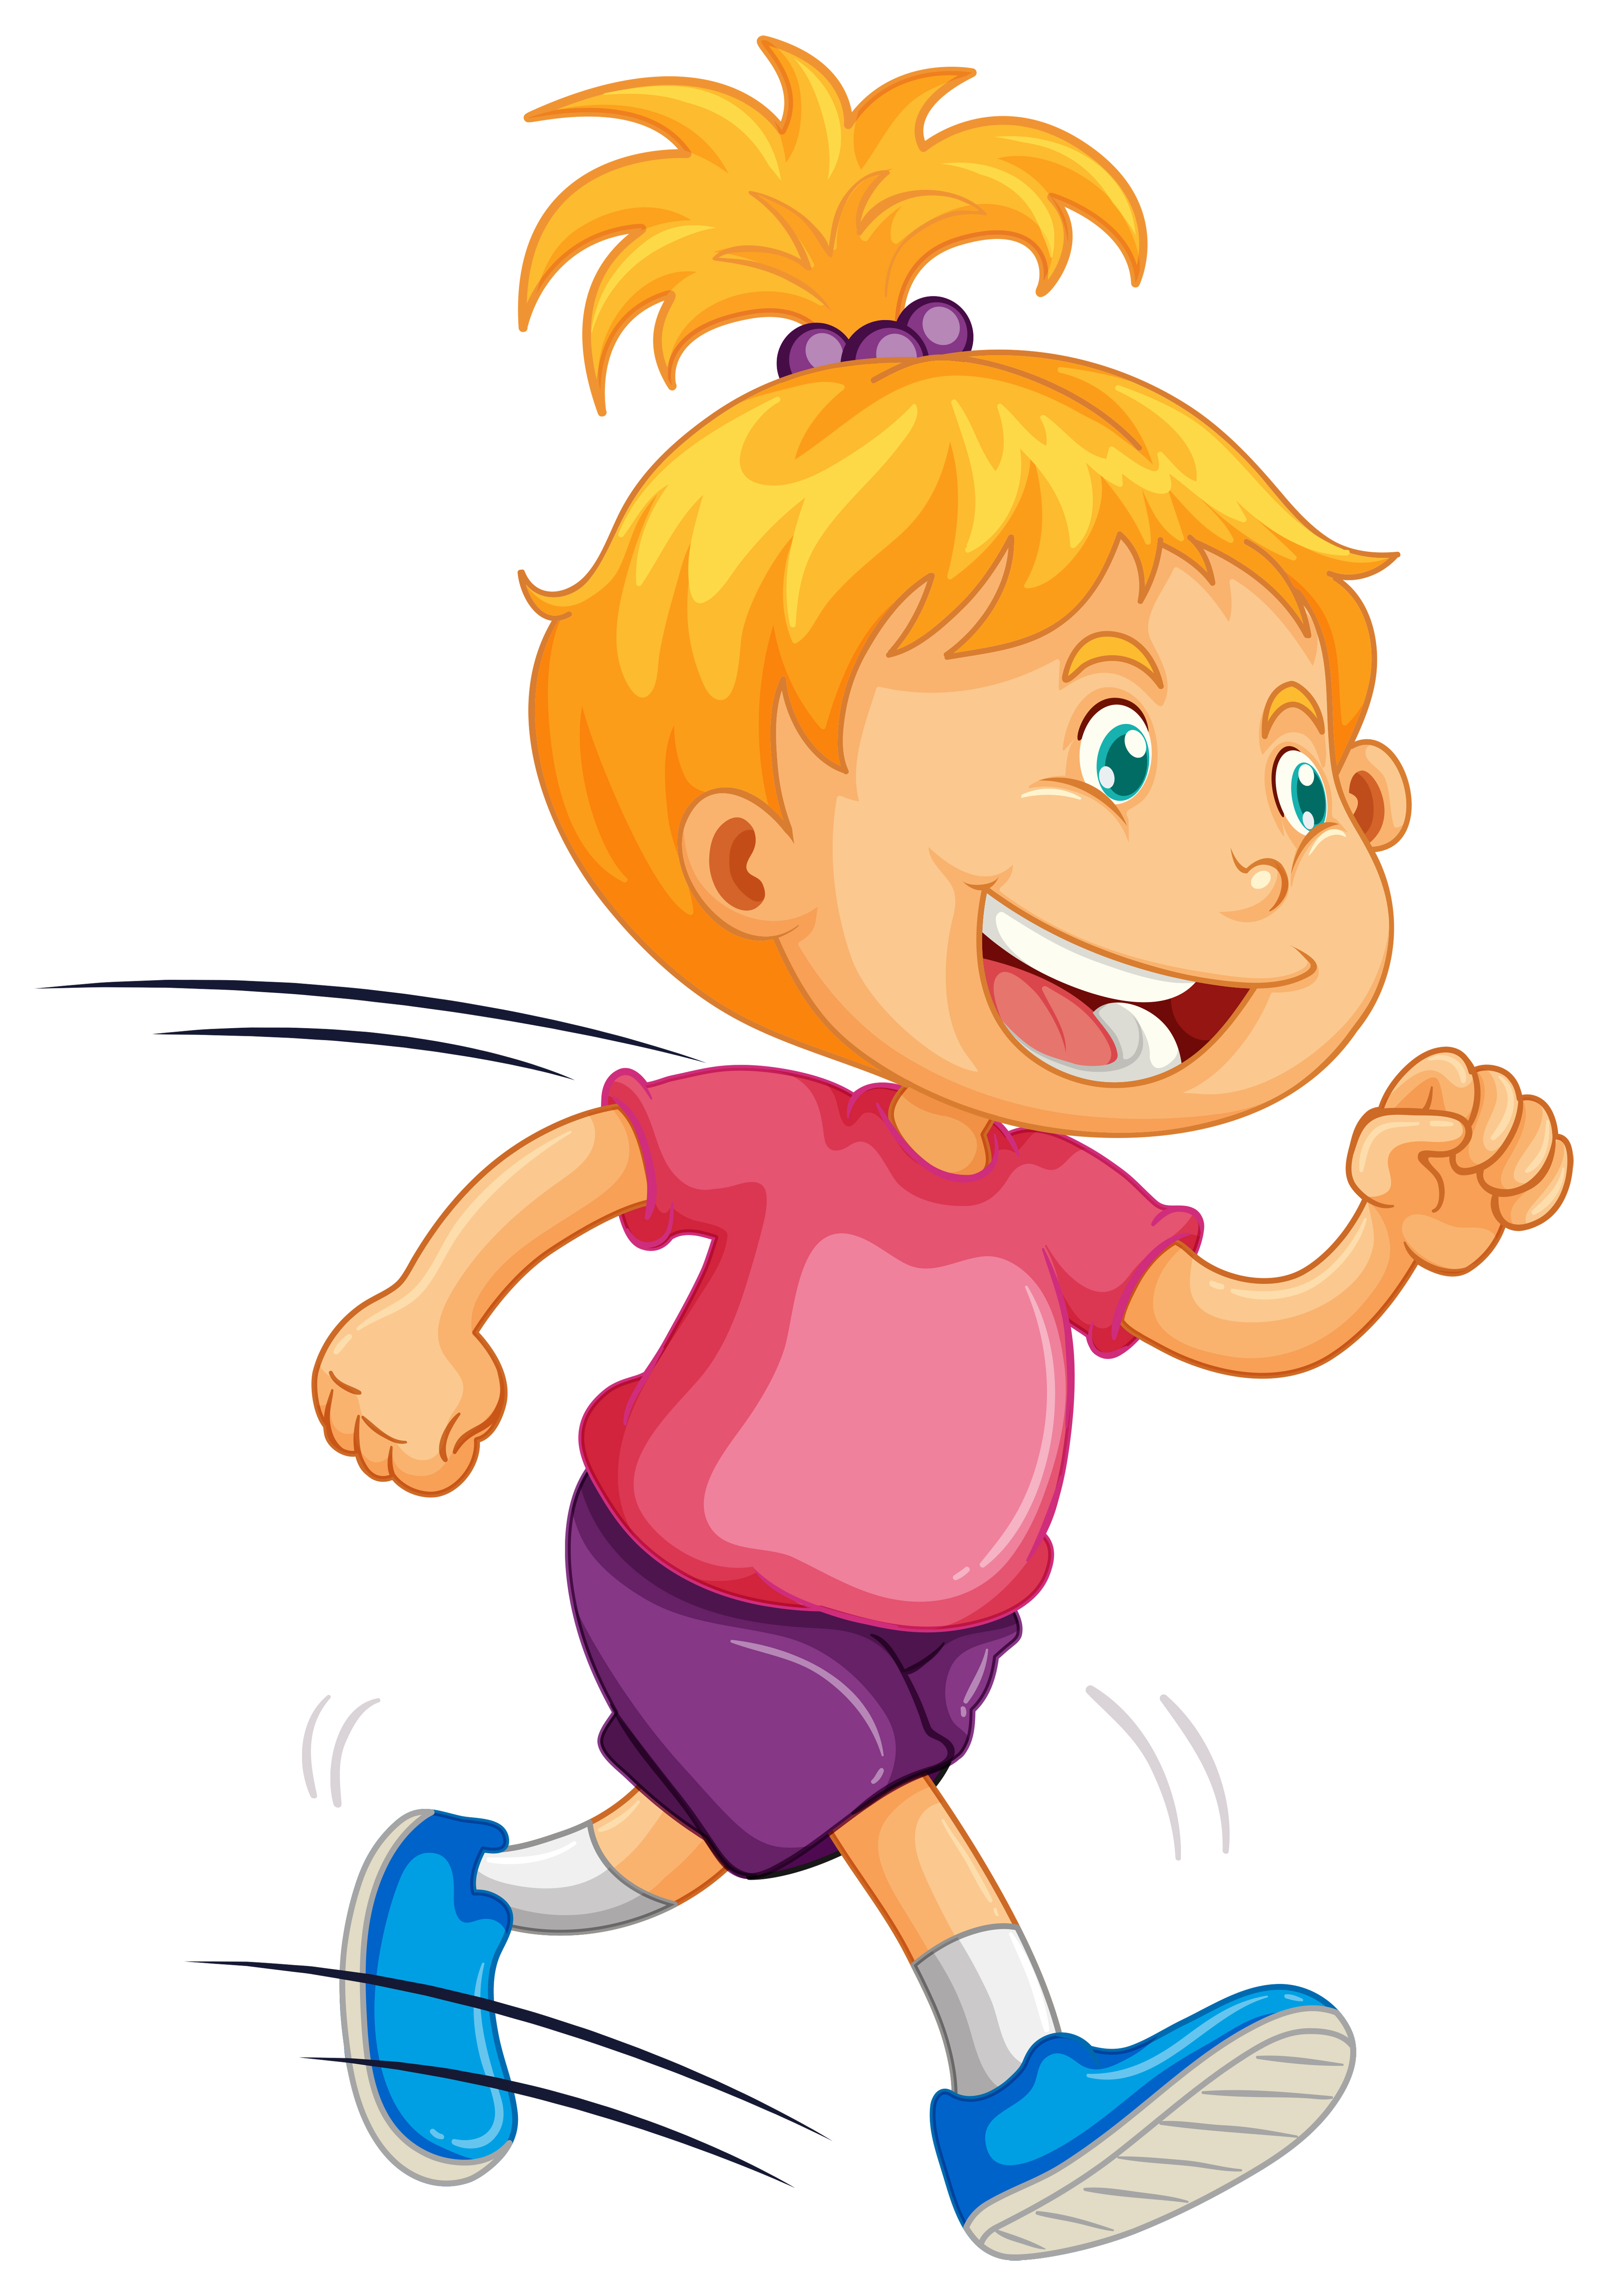 A Kid Running on White Background - Download Free Vectors, Clipart